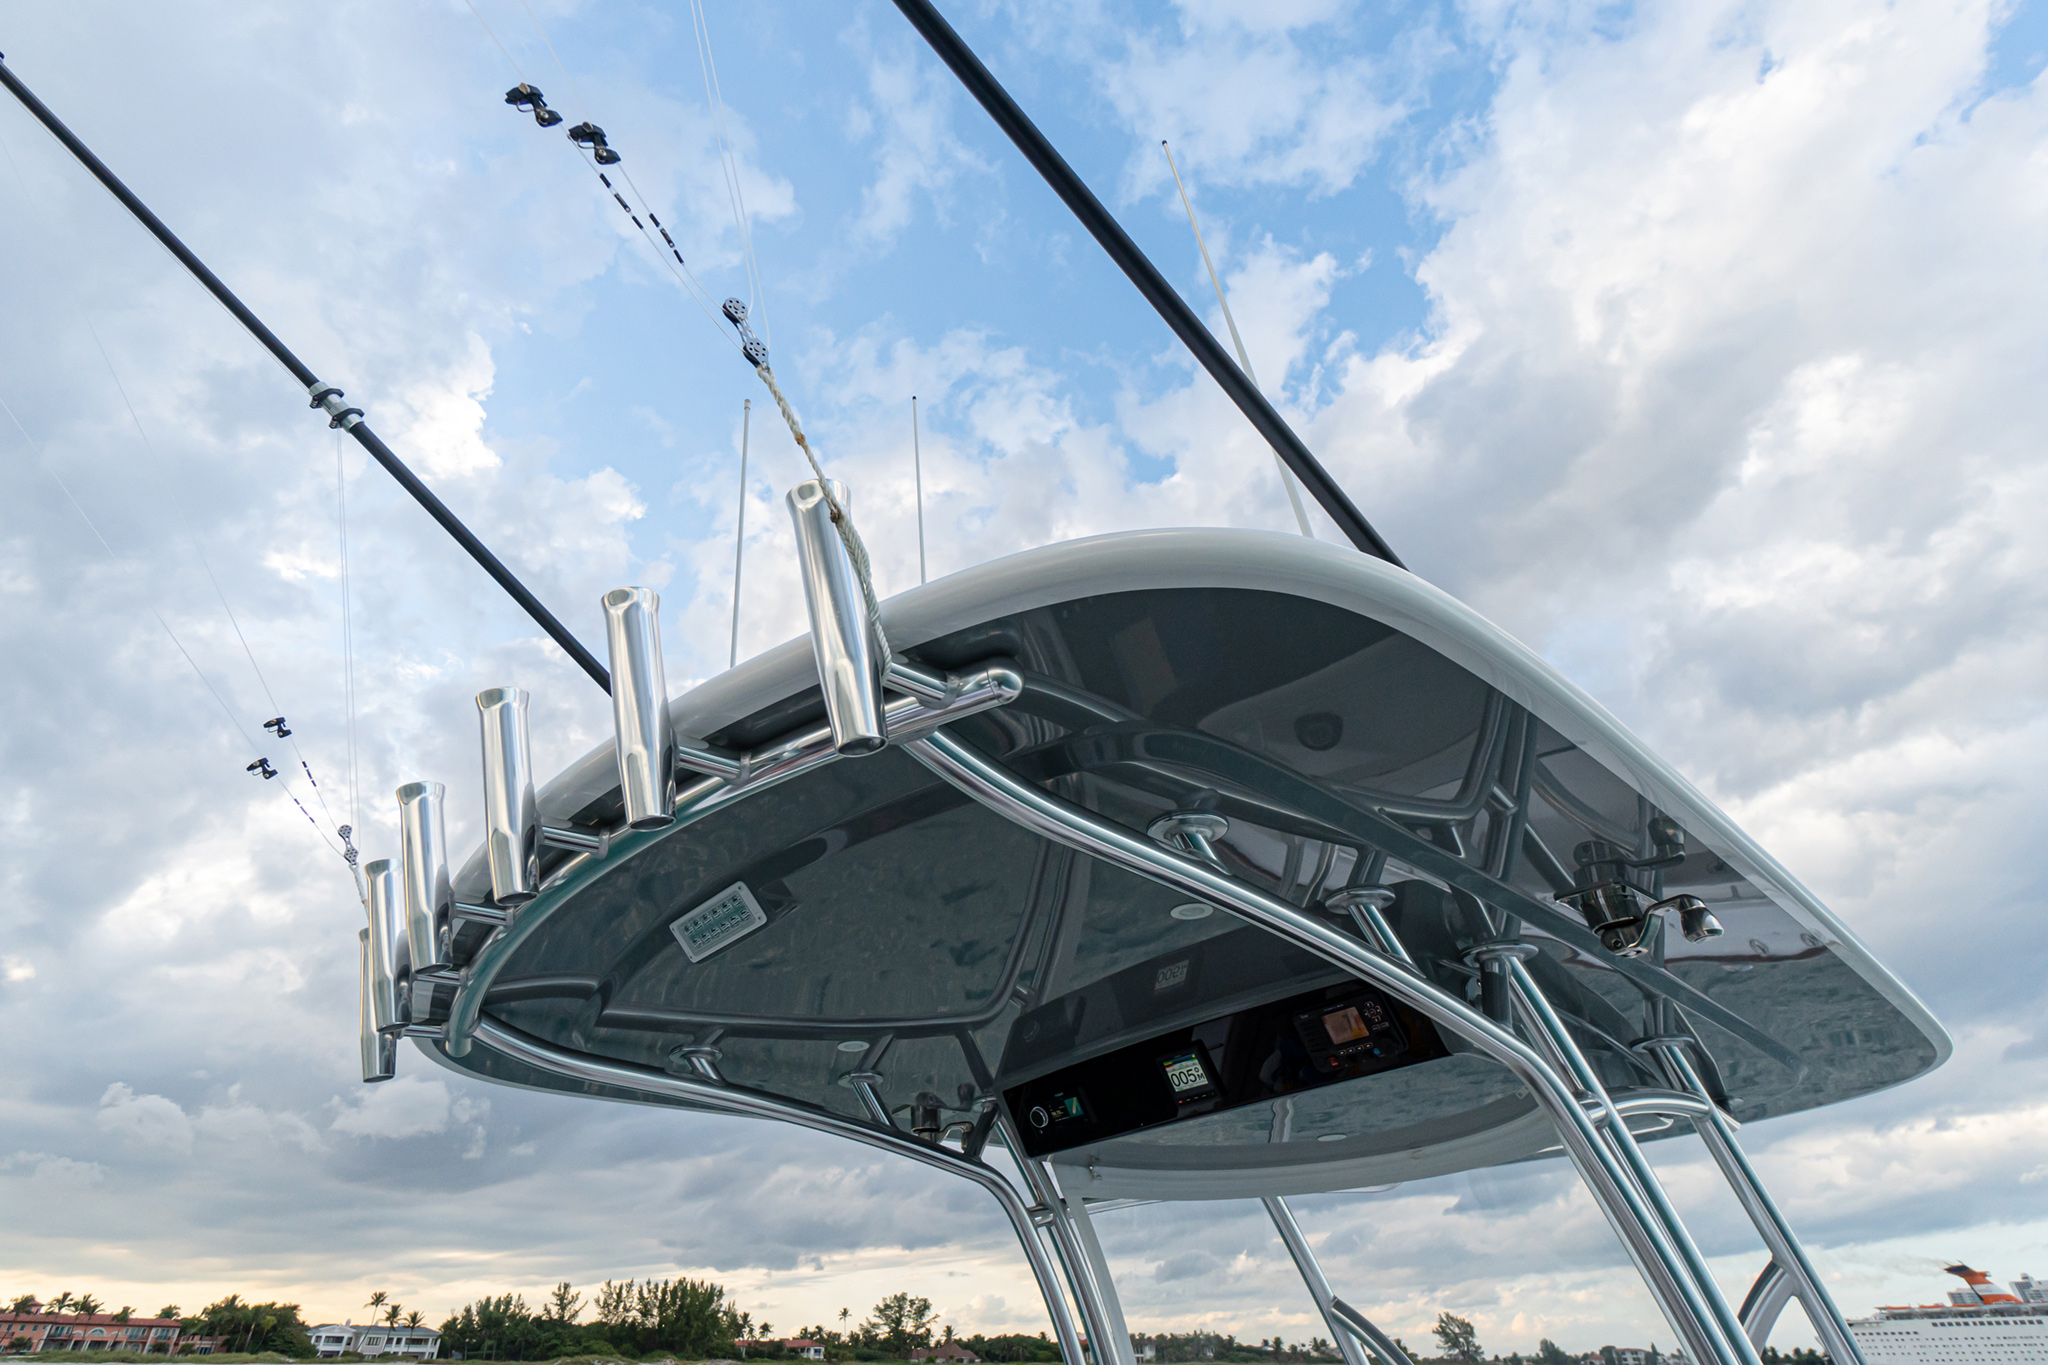 Hardtop underside matches hull; industry-leading fit and finish, top-shelf fishing components.